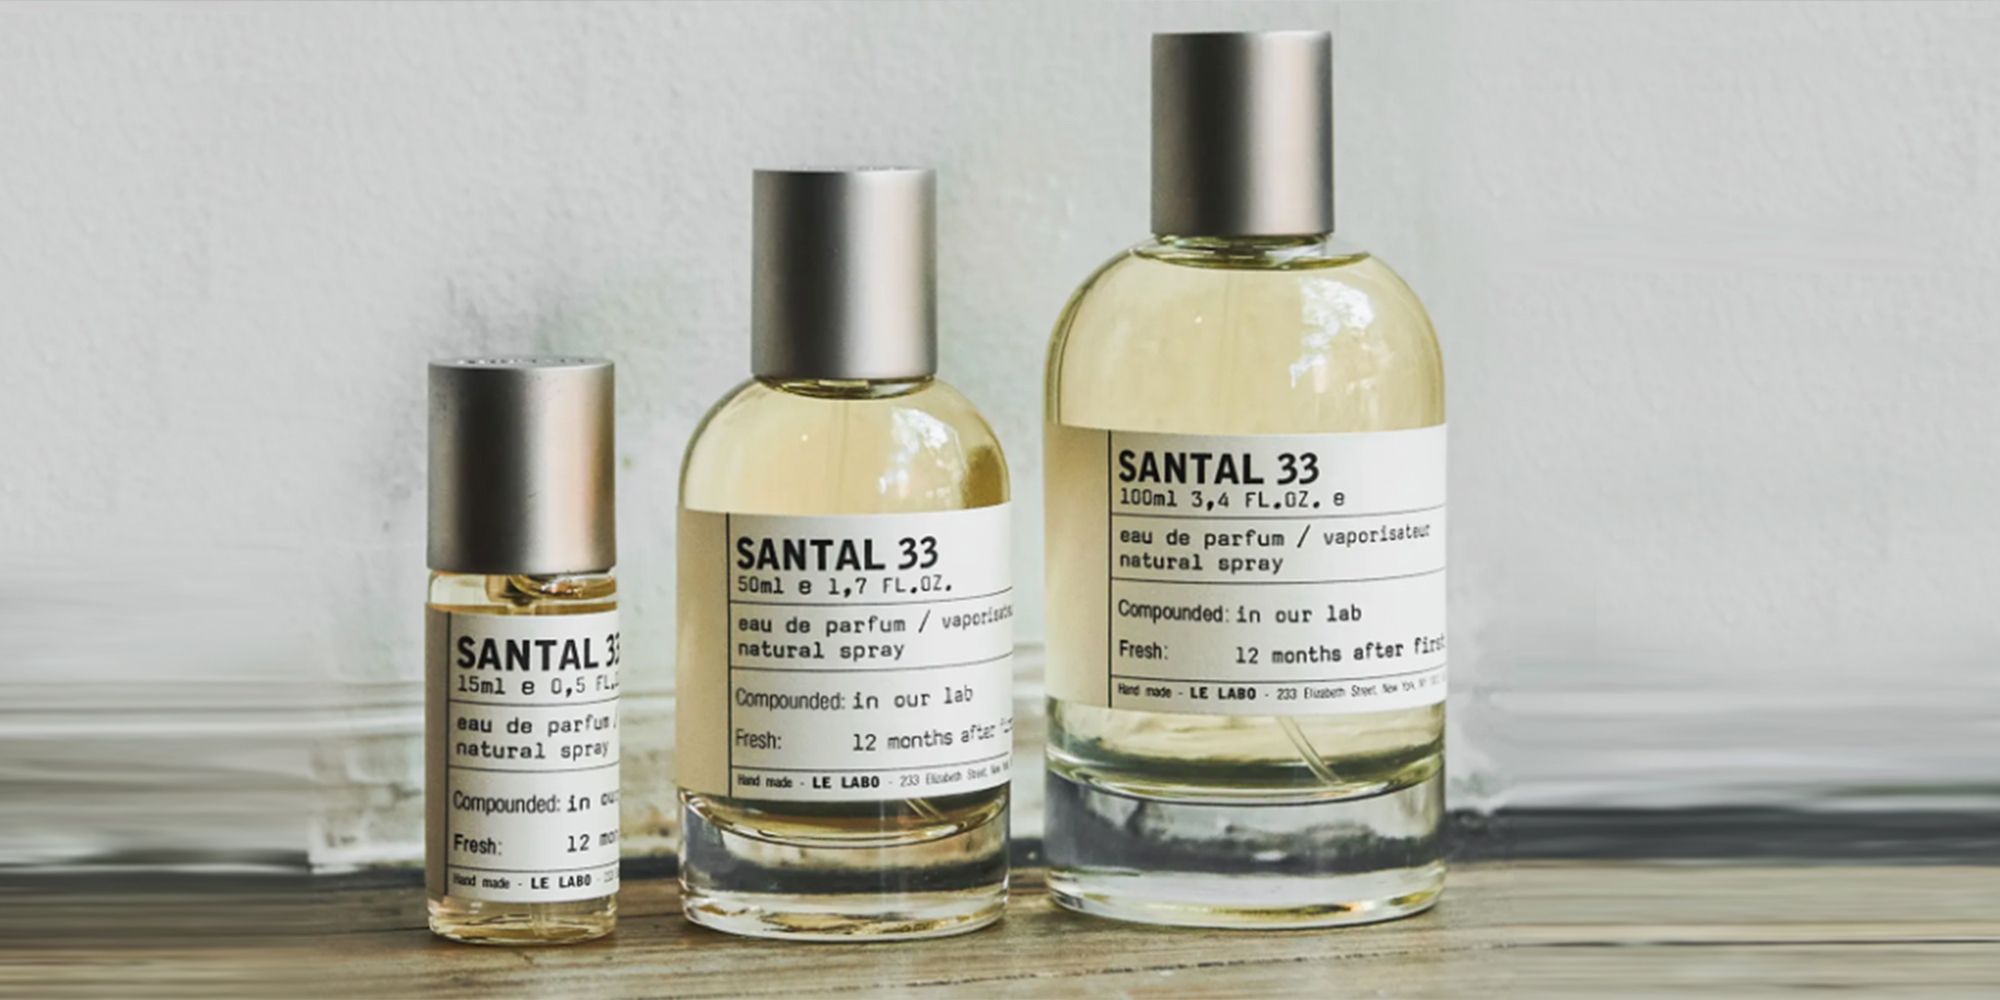 The Best Le Labo Perfumes To Shop In 2023 - Top Le Labo Scents